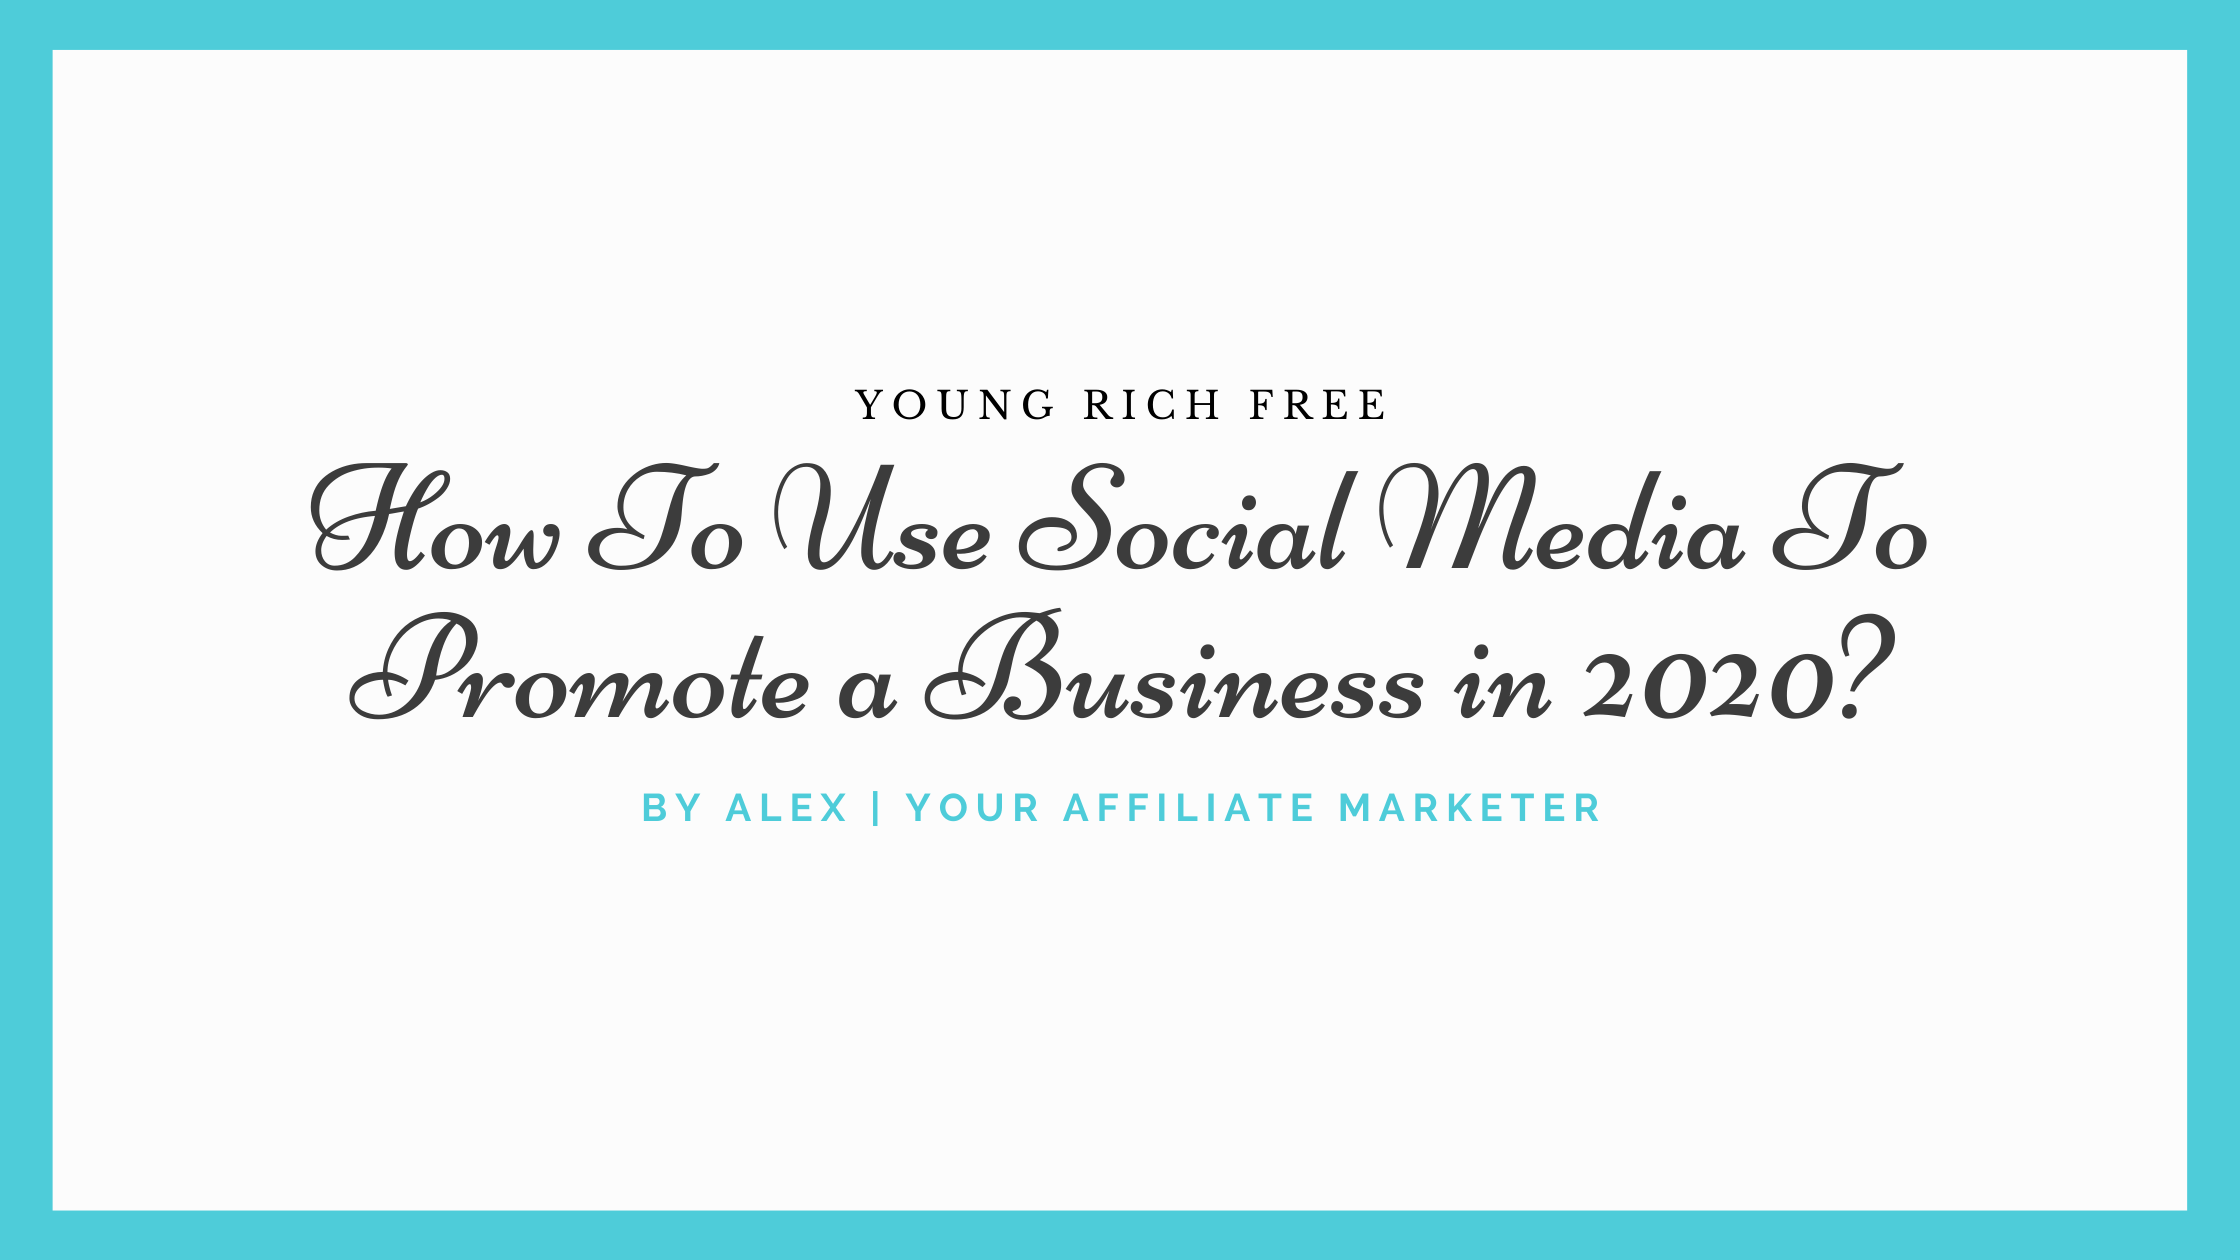 How To Use Social Media To Promote a Business in 2020?